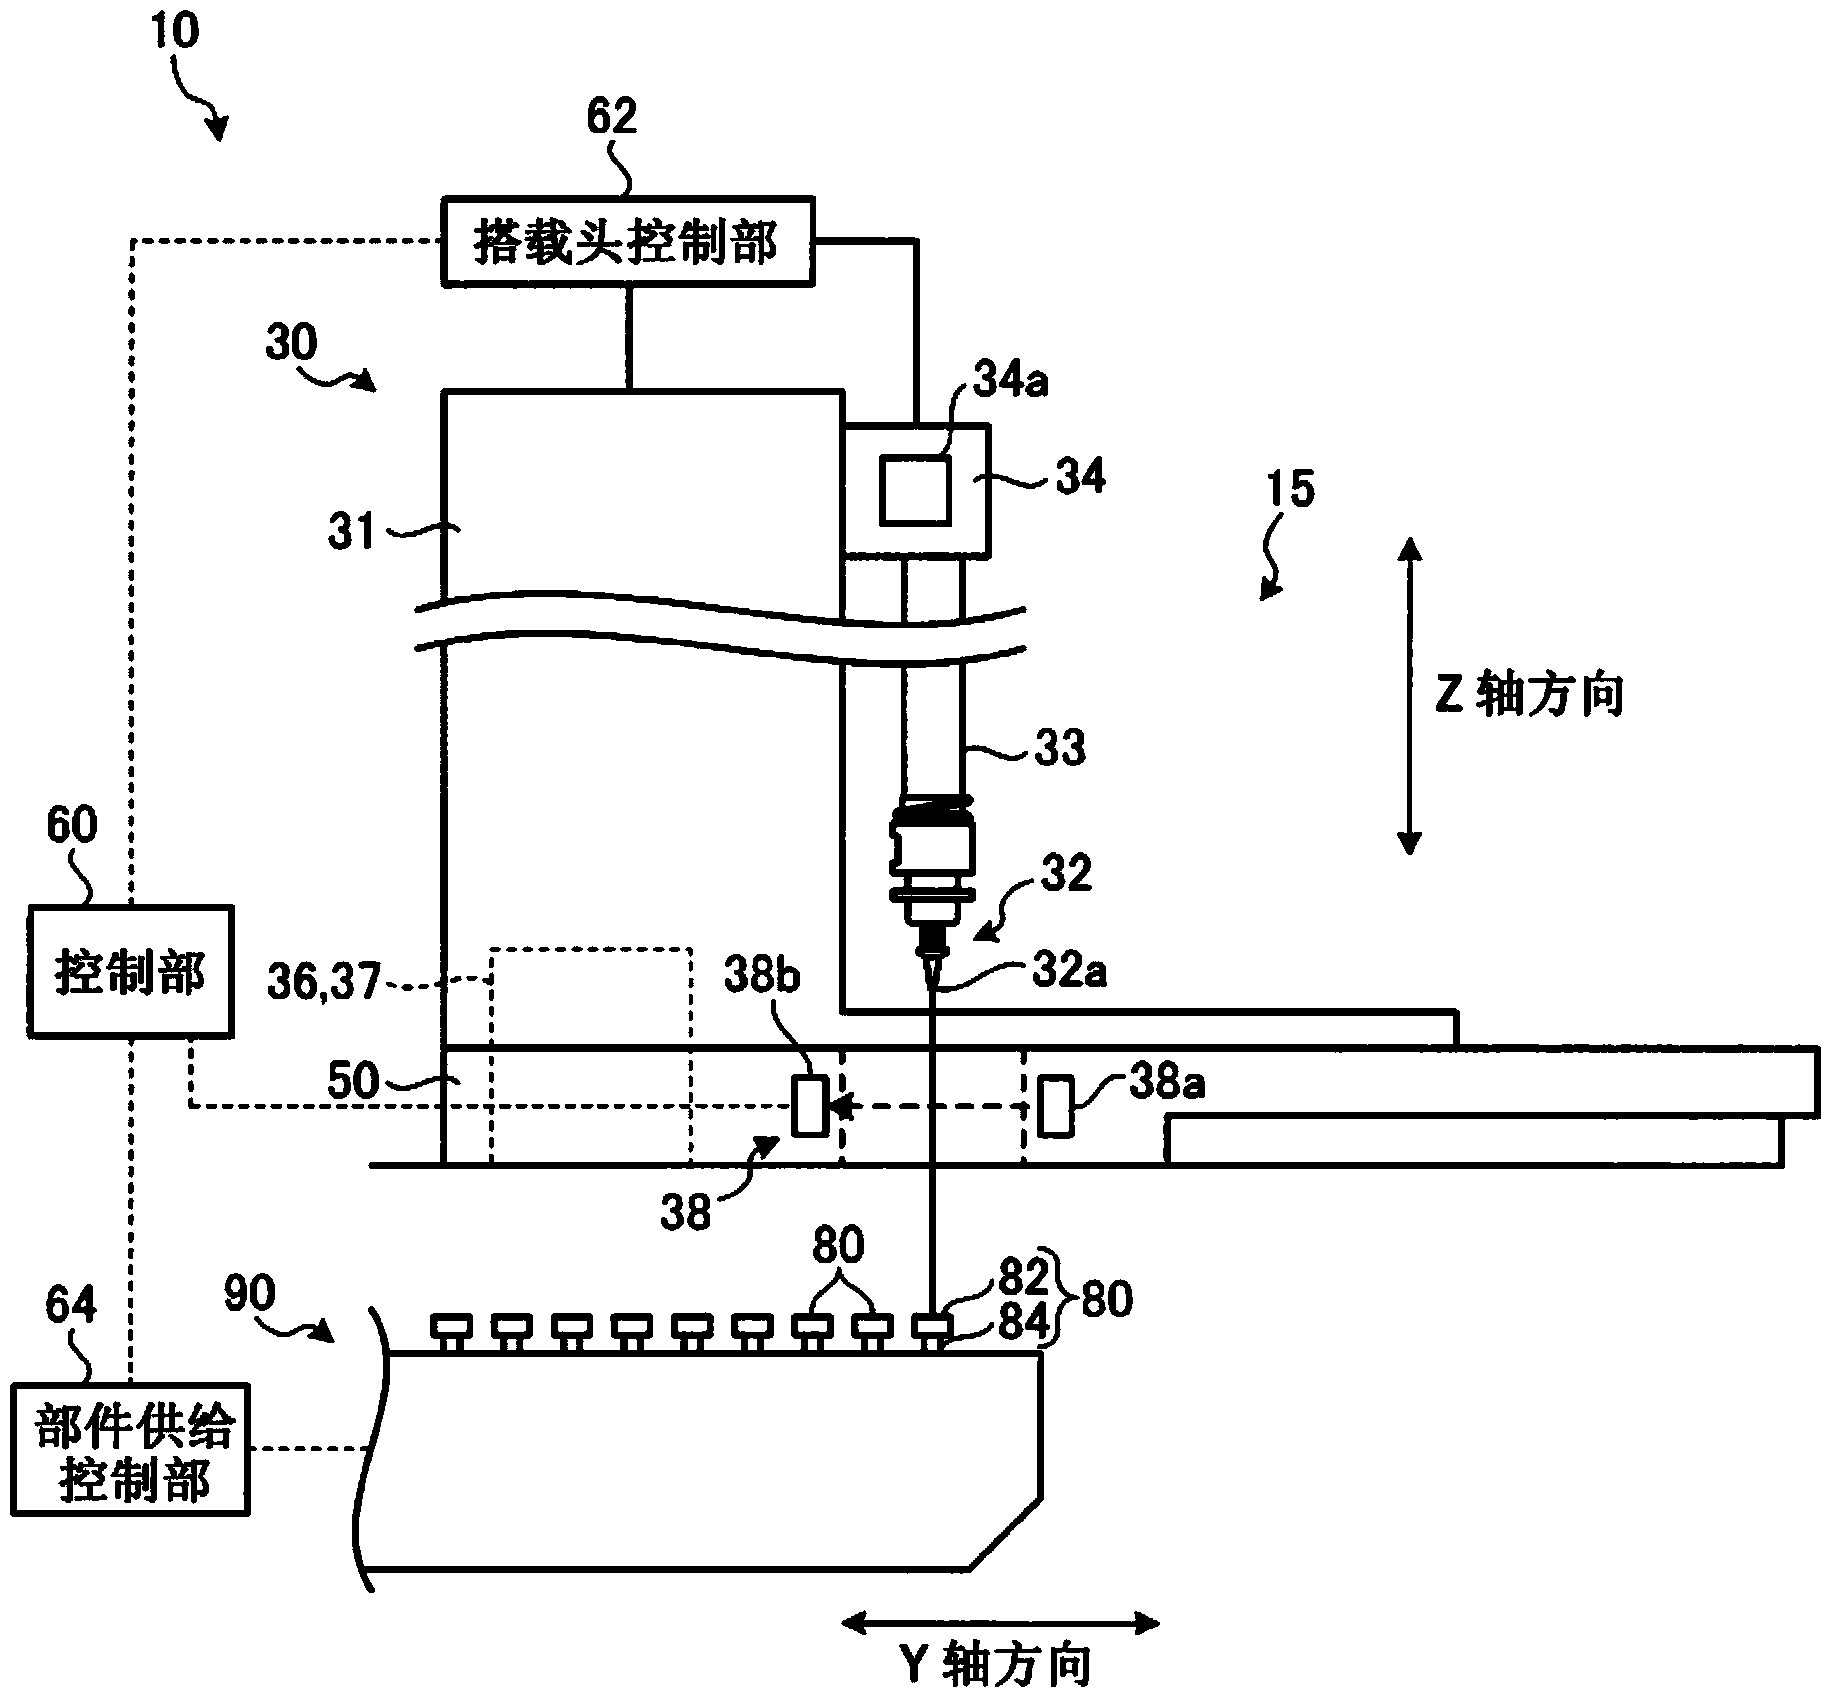 Electronic part installation apparatus